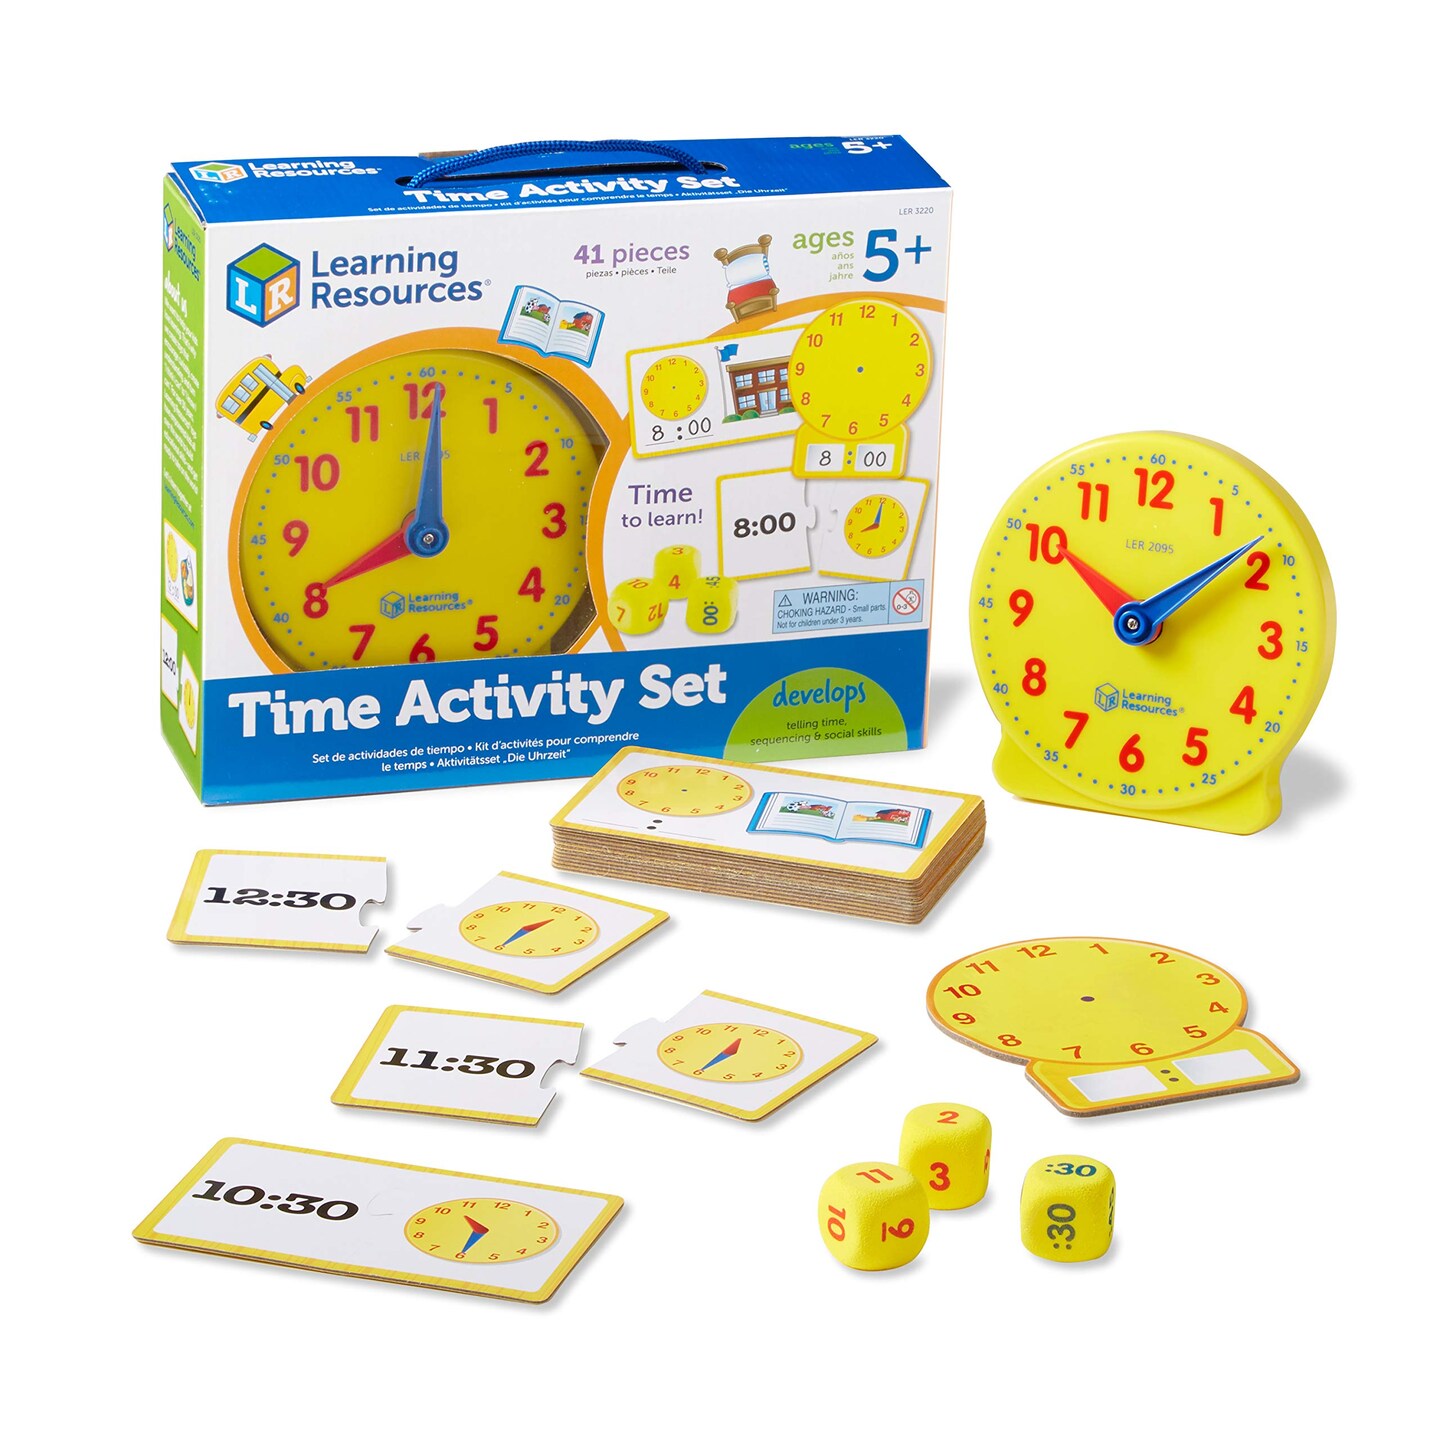 Learning Resources Time Activity Set - 41 Pieces, Ages 5+,Clock for Teaching Time, Telling Time, Homeschool Supplies, Montessori Clock